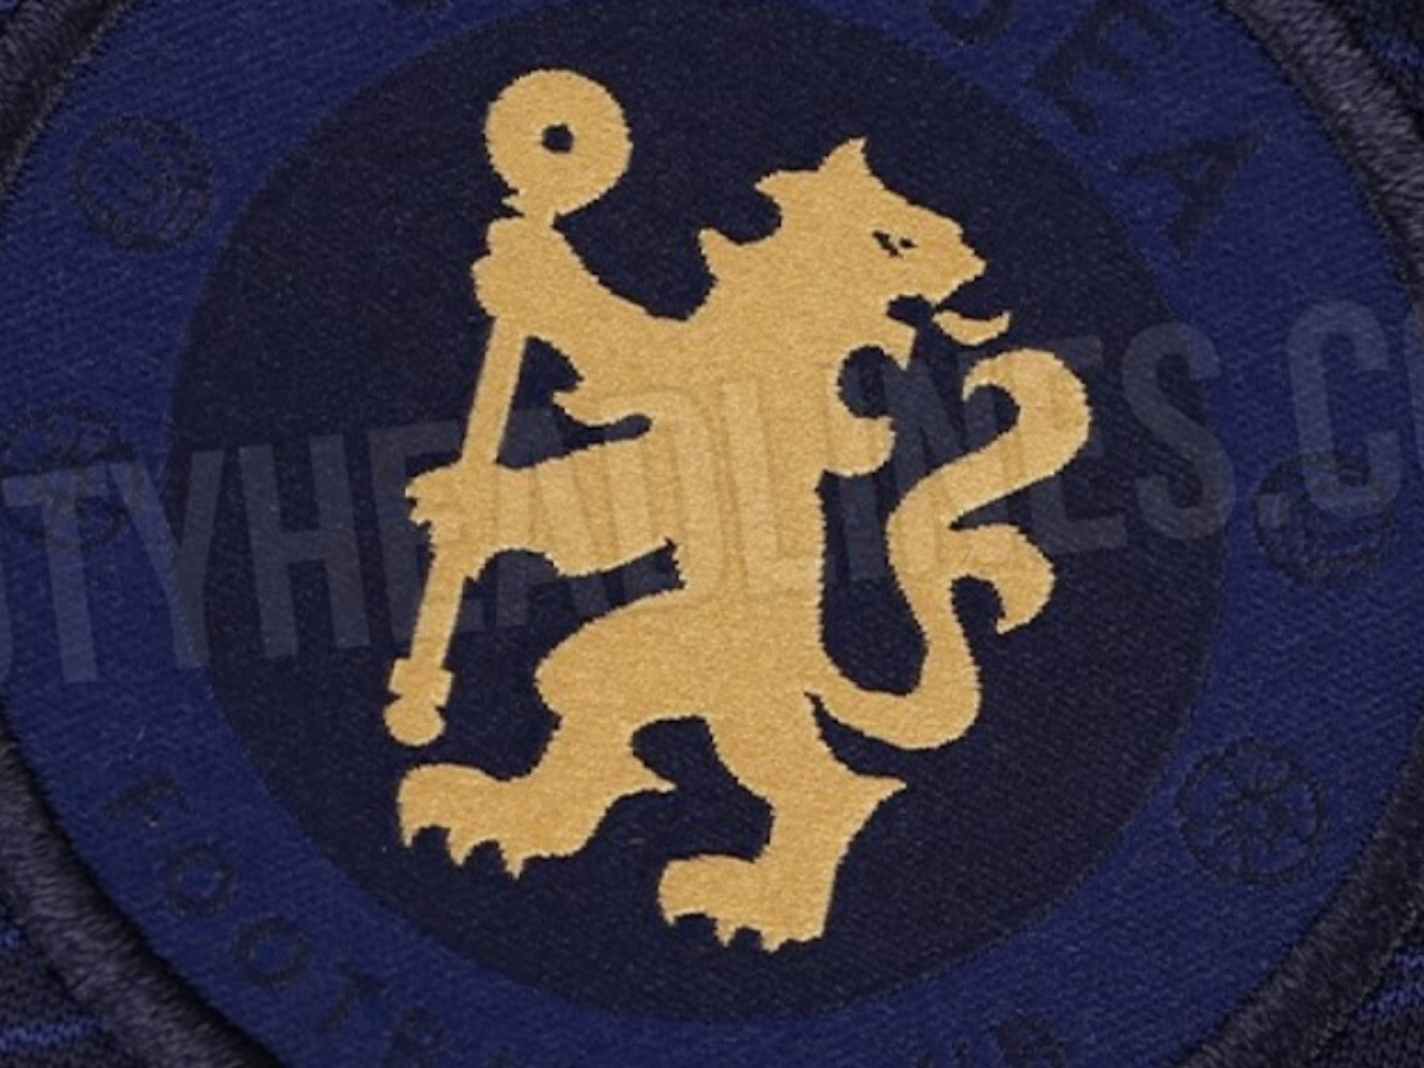 New Chelsea pre-match shirt with iconic lion badge leaks online